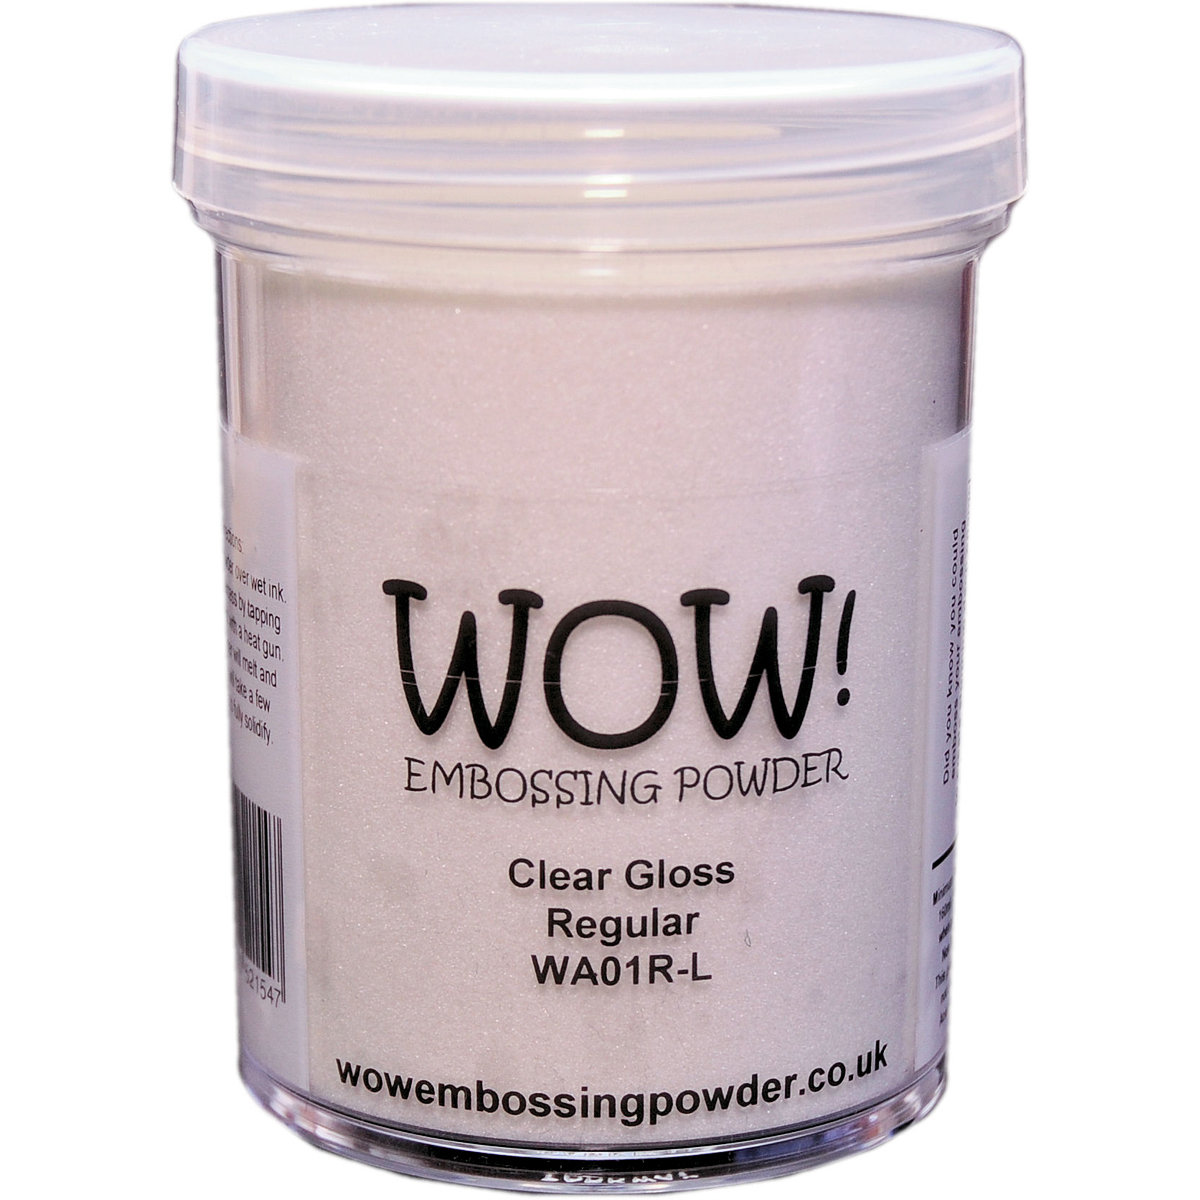 WOW! CLEAR GLOSS- Superfine Embossing Powder- Large jar